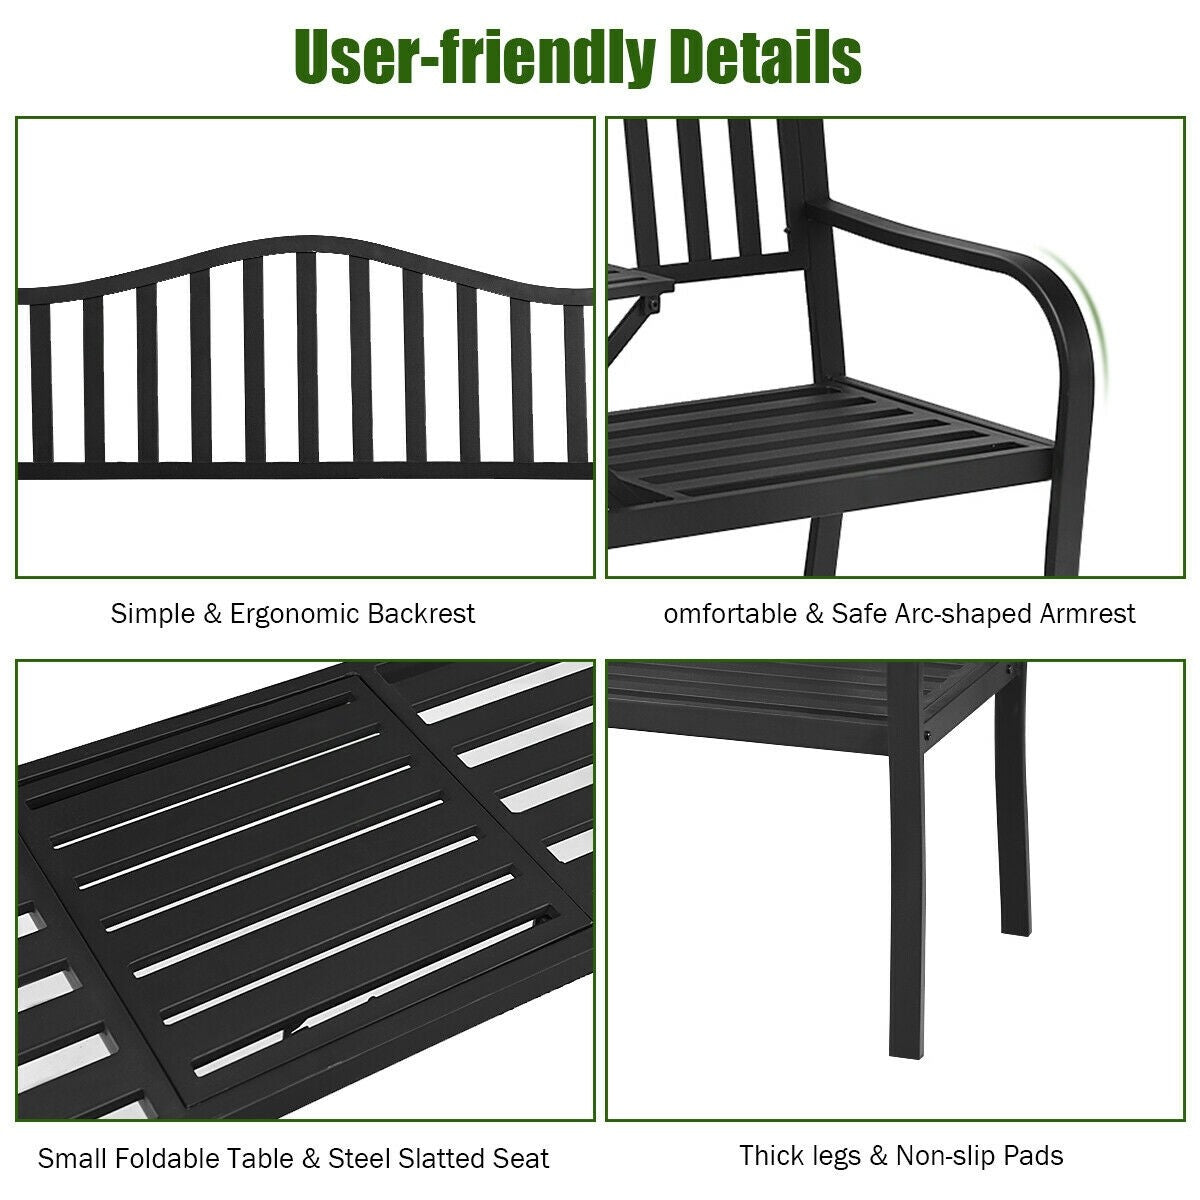 Giantex Patio Bench w/ Pullout Middle Table, Outdoor Benches2-3 Person, Metal Benches for Outside (Black)